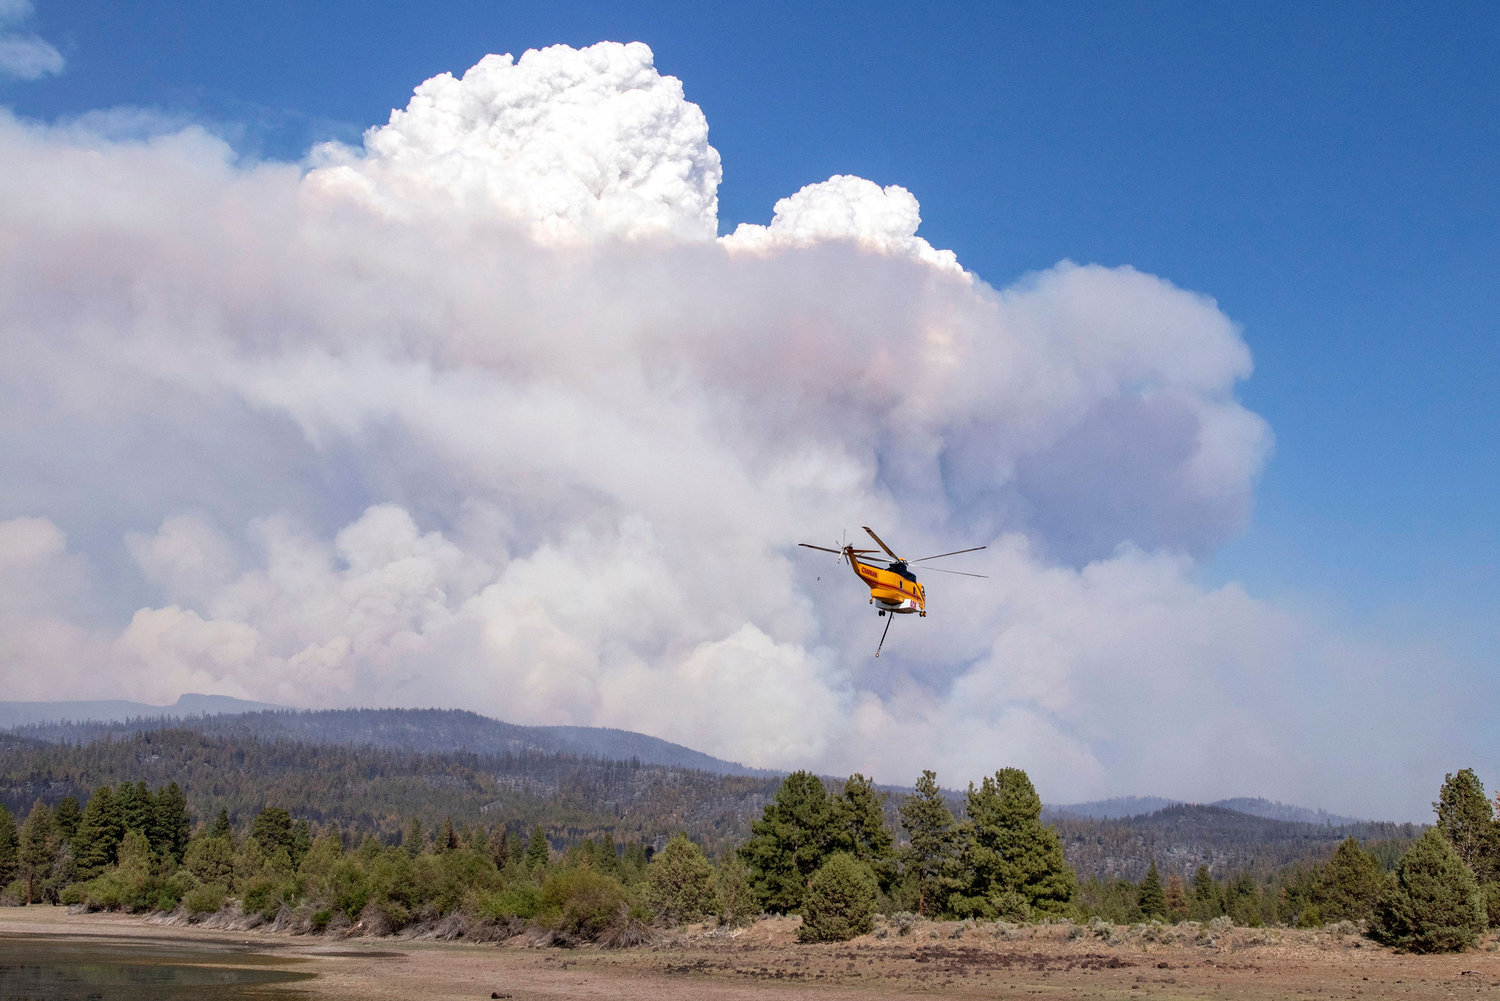 A helicopter flies with a load of water to the Bootleg Fire, 27 miles northeast of Klamath Falls, near Bly, Oregon on July 15, 2021. - A brutal start to the wildfire season in the western United States and Canada worsened July 15, 2021 as a massive Oregon blaze exploded in dry, windy conditions and a new California blaze threatened communities devastated by the 2018 Camp Fire. The Bootleg Fire located 27 miles northeast of Klamath Falls, Oregon, caught fire nine days ago on July 6, 2021, due to an unknown cause. It is the largest burning wildfire in the United States at 227,234 acres as of July 15, 2021. The fire now stretches for 31 miles and grows between two and three miles a day. According to BLM Fire Mitigation and Education Specialist Ryan Berlin, there are approximately 2000 firefighters combating the Bootleg Fire. The fire is currently at 7% containment.